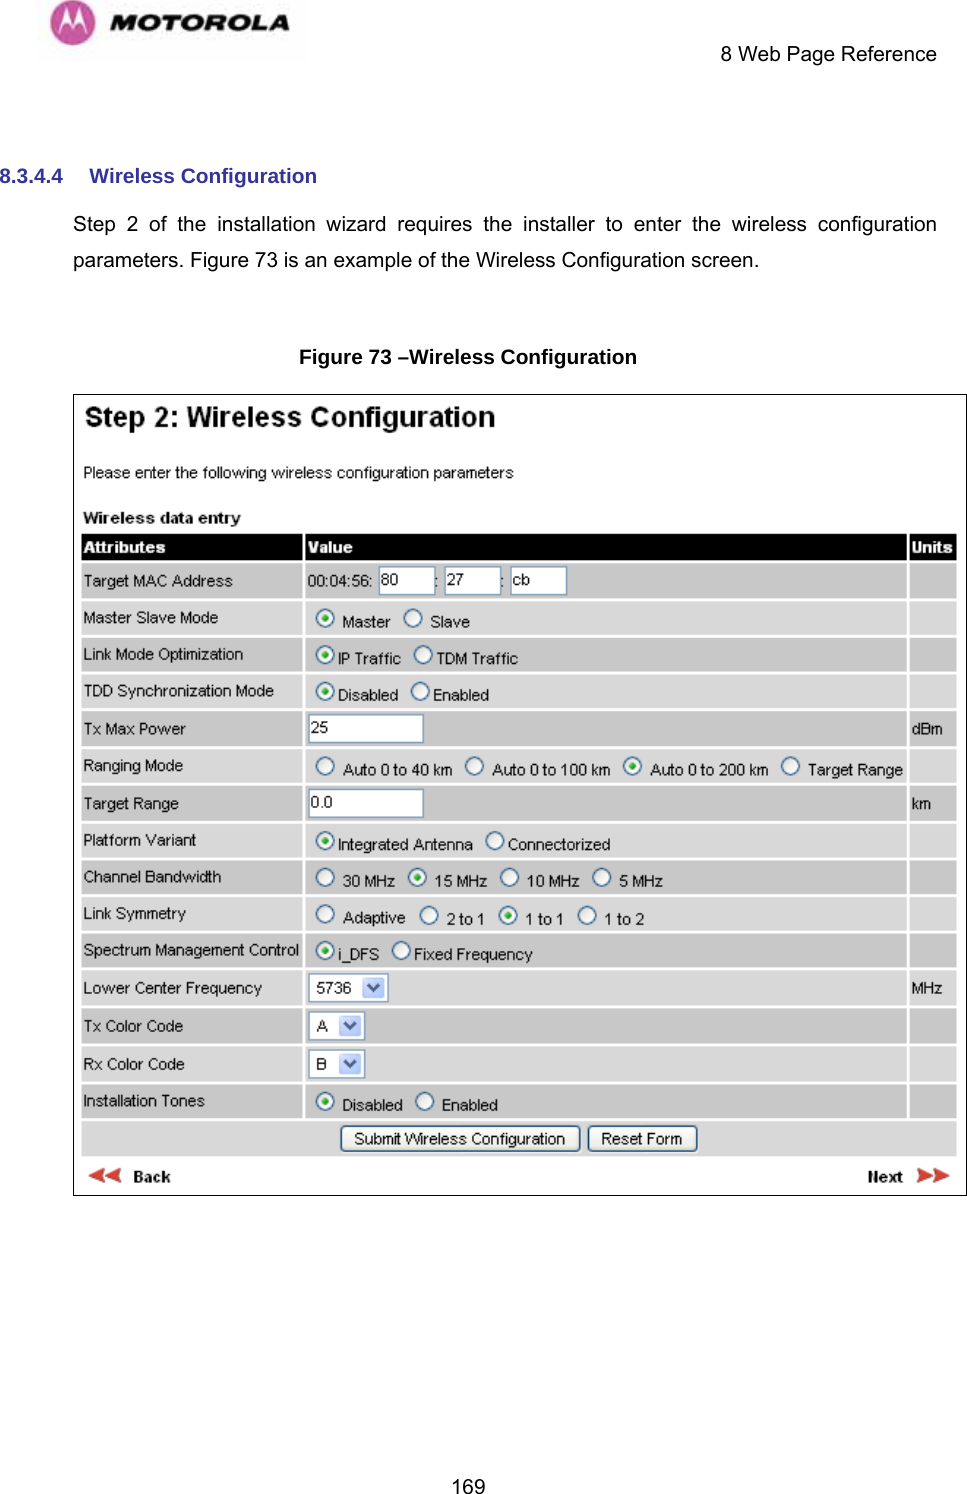     8 Web Page Reference  169 8.3.4.4 Wireless Configuration Step 2 of the installation wizard requires the installer to enter the wireless configuration parameters. Figure 73 is an example of the Wireless Configuration screen.   Figure 73 –Wireless Configuration   